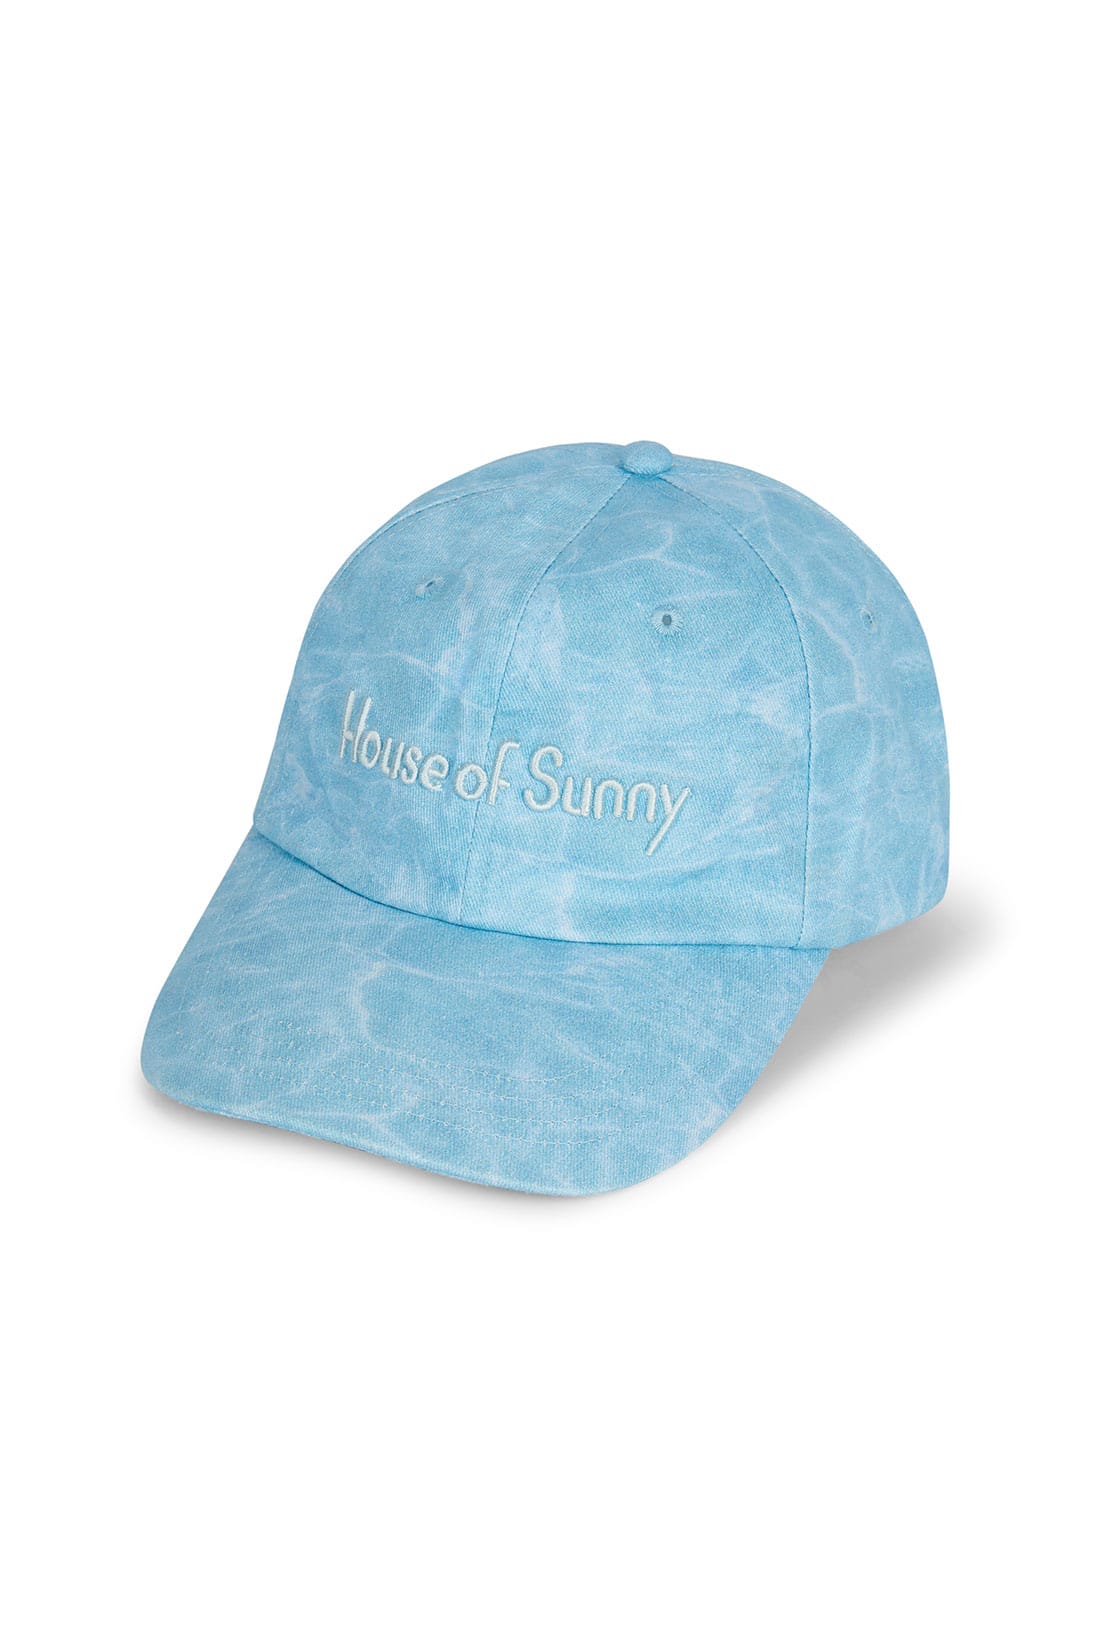 https%3A%2F%2Fhypebeast.com%2Fwp content%2Fblogs.dir%2F6%2Ffiles%2F2021%2F05%2Fhouse of sunny ss21 pure shore collection 15